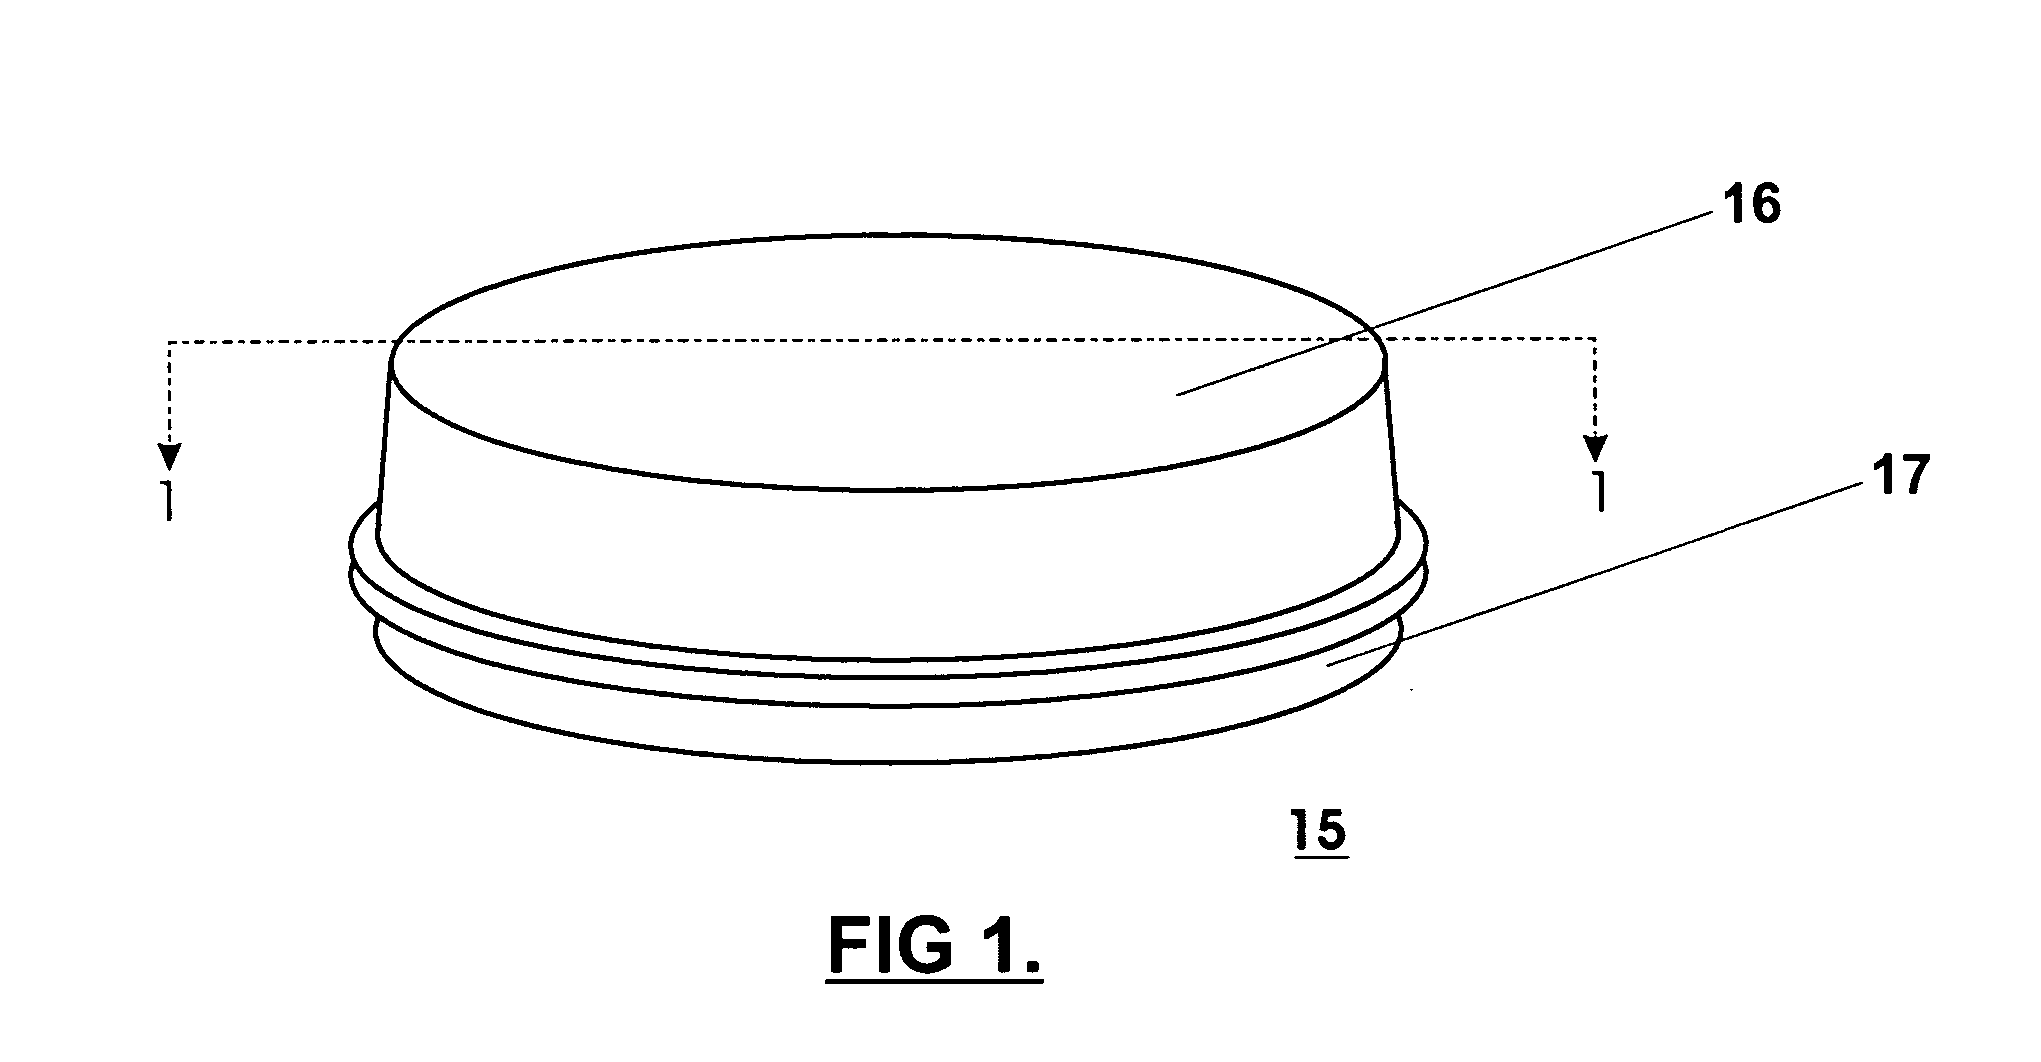 Integrated circuit wafer packaging system and method